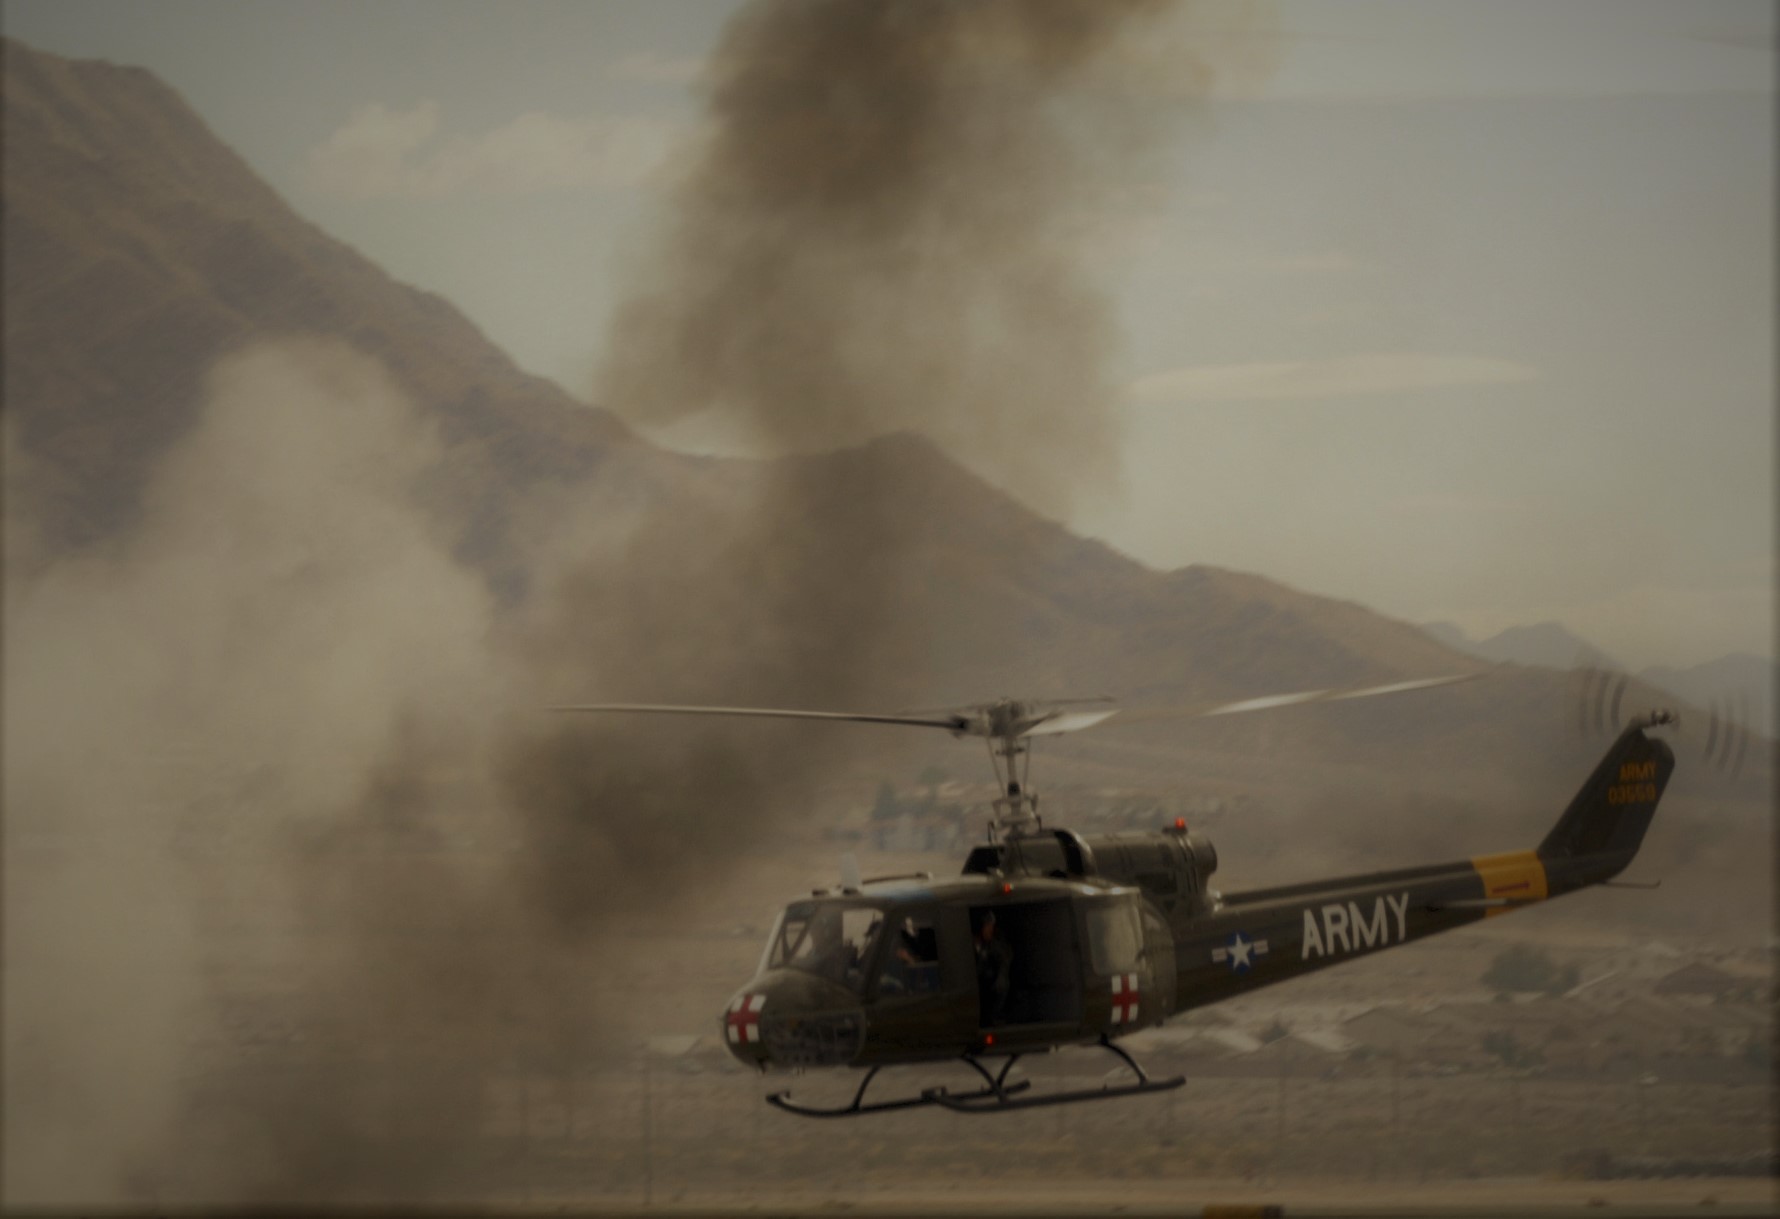 An UH-1 Huey helicopter prepares to land to pick up a downed pilot during a Vietnam war re-enactment during the Aviation Nation air show on Nellis Air Force Base, Nev., Nov. 11, 2007.